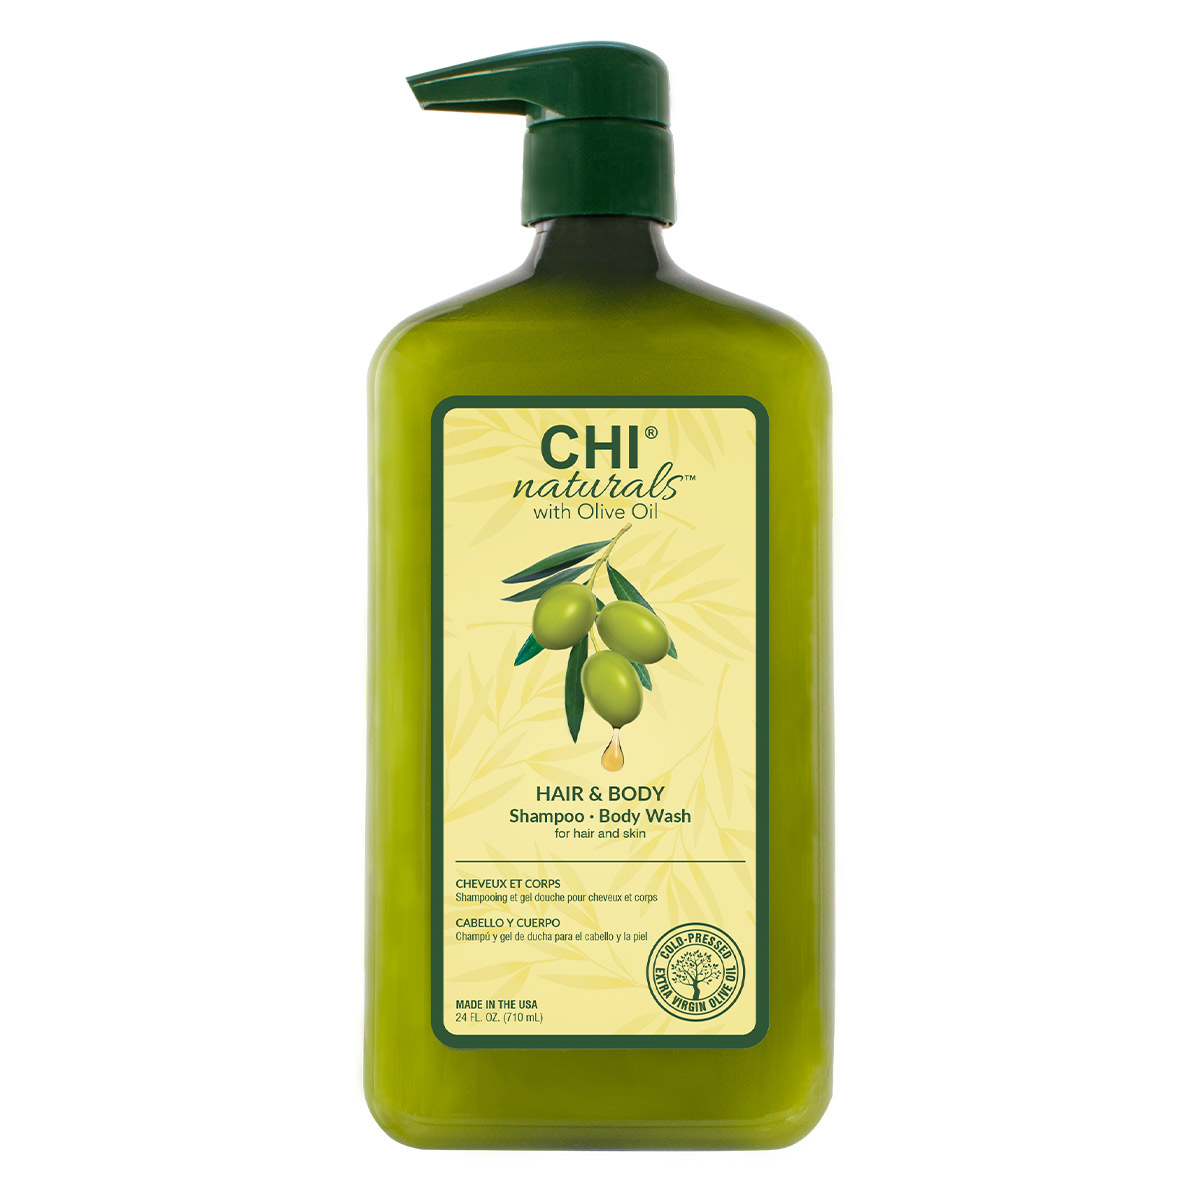 Ajania - CHI Naturals with Olive Oil Hair and Body Shampoo-340 ml